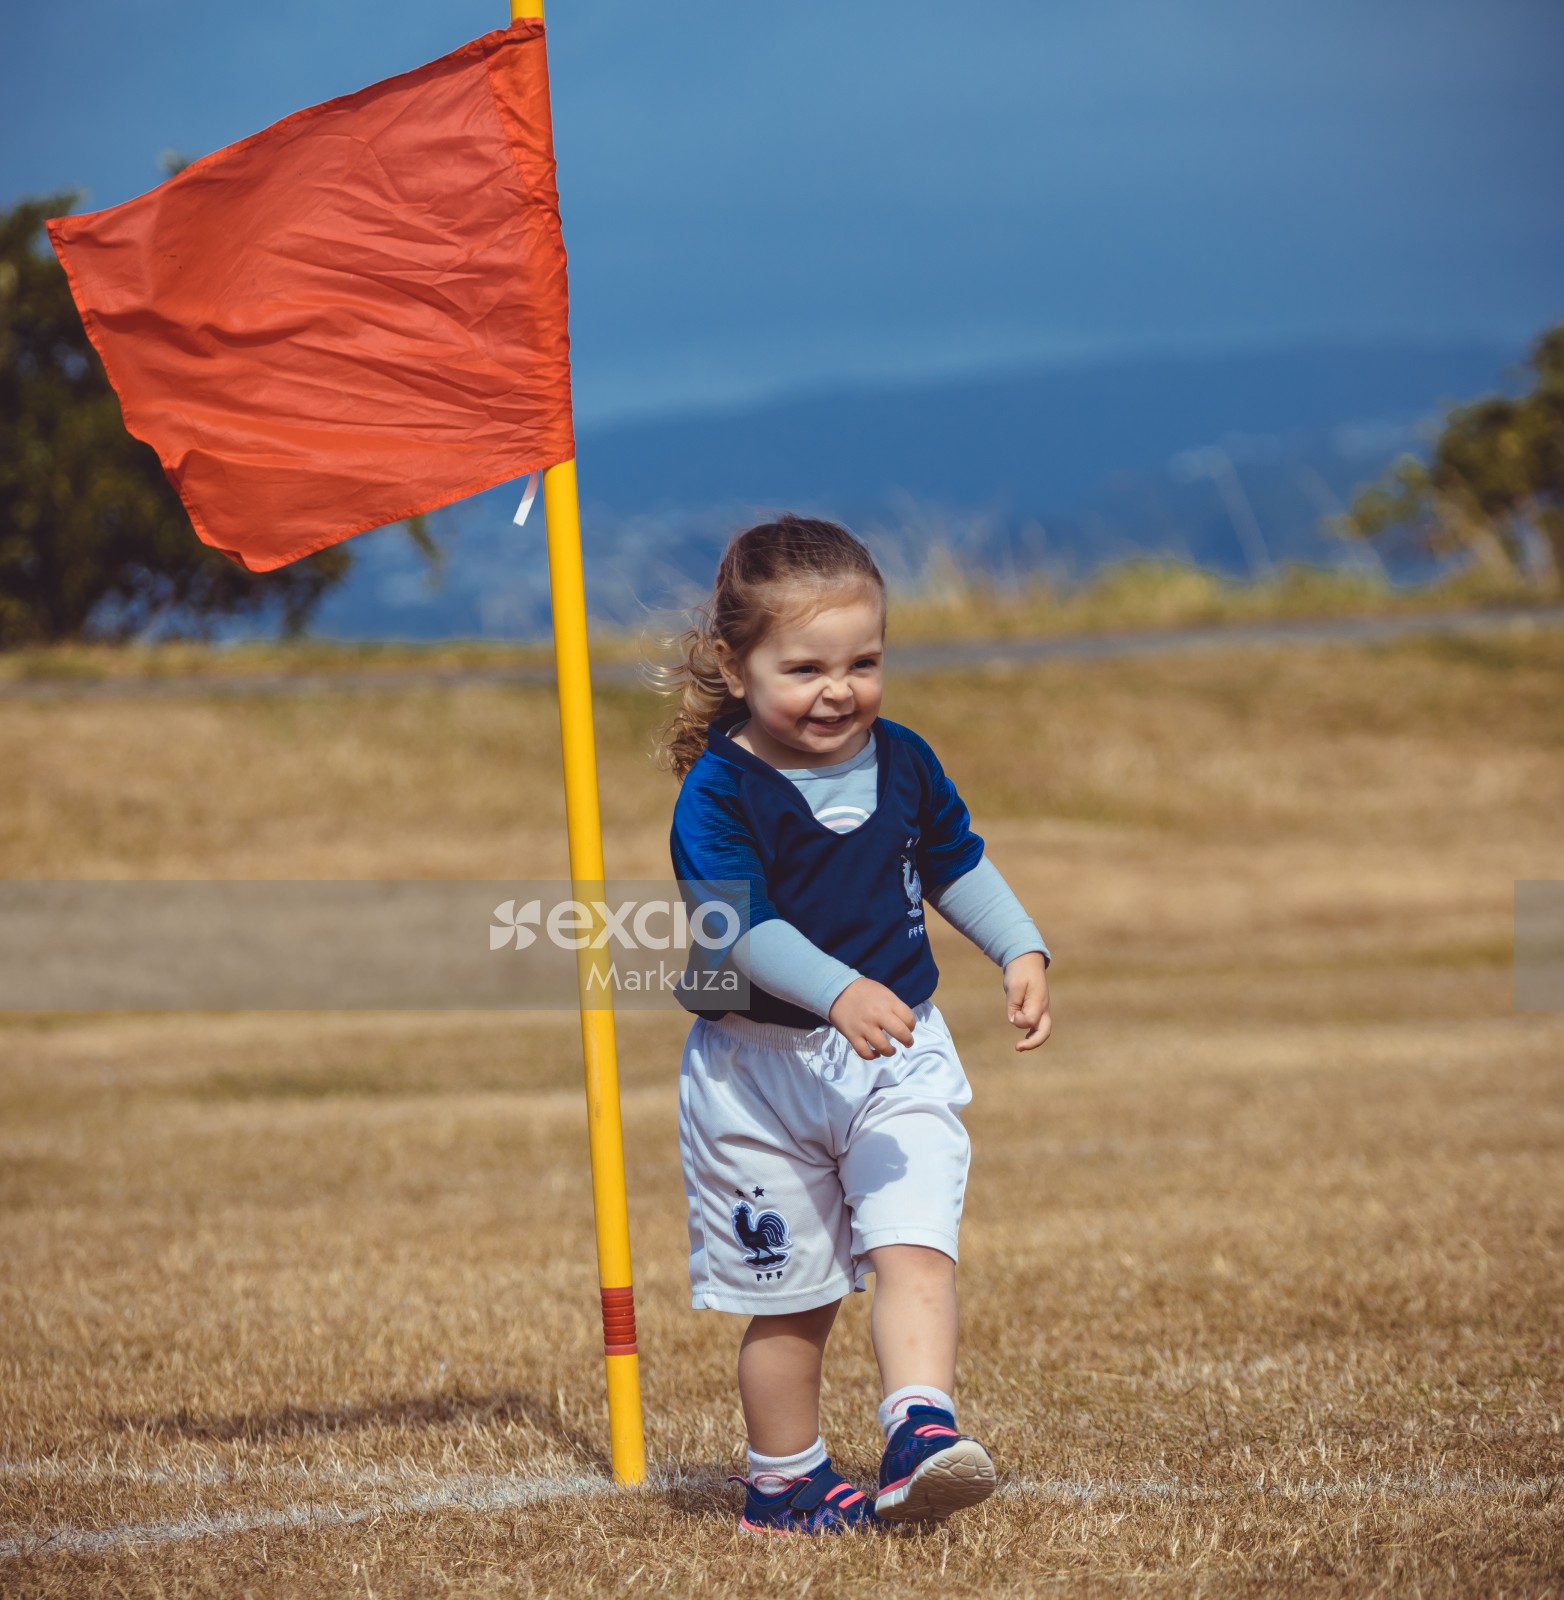 Little girl in French team kit standing with yellow pole and red flag - Little Dribblers